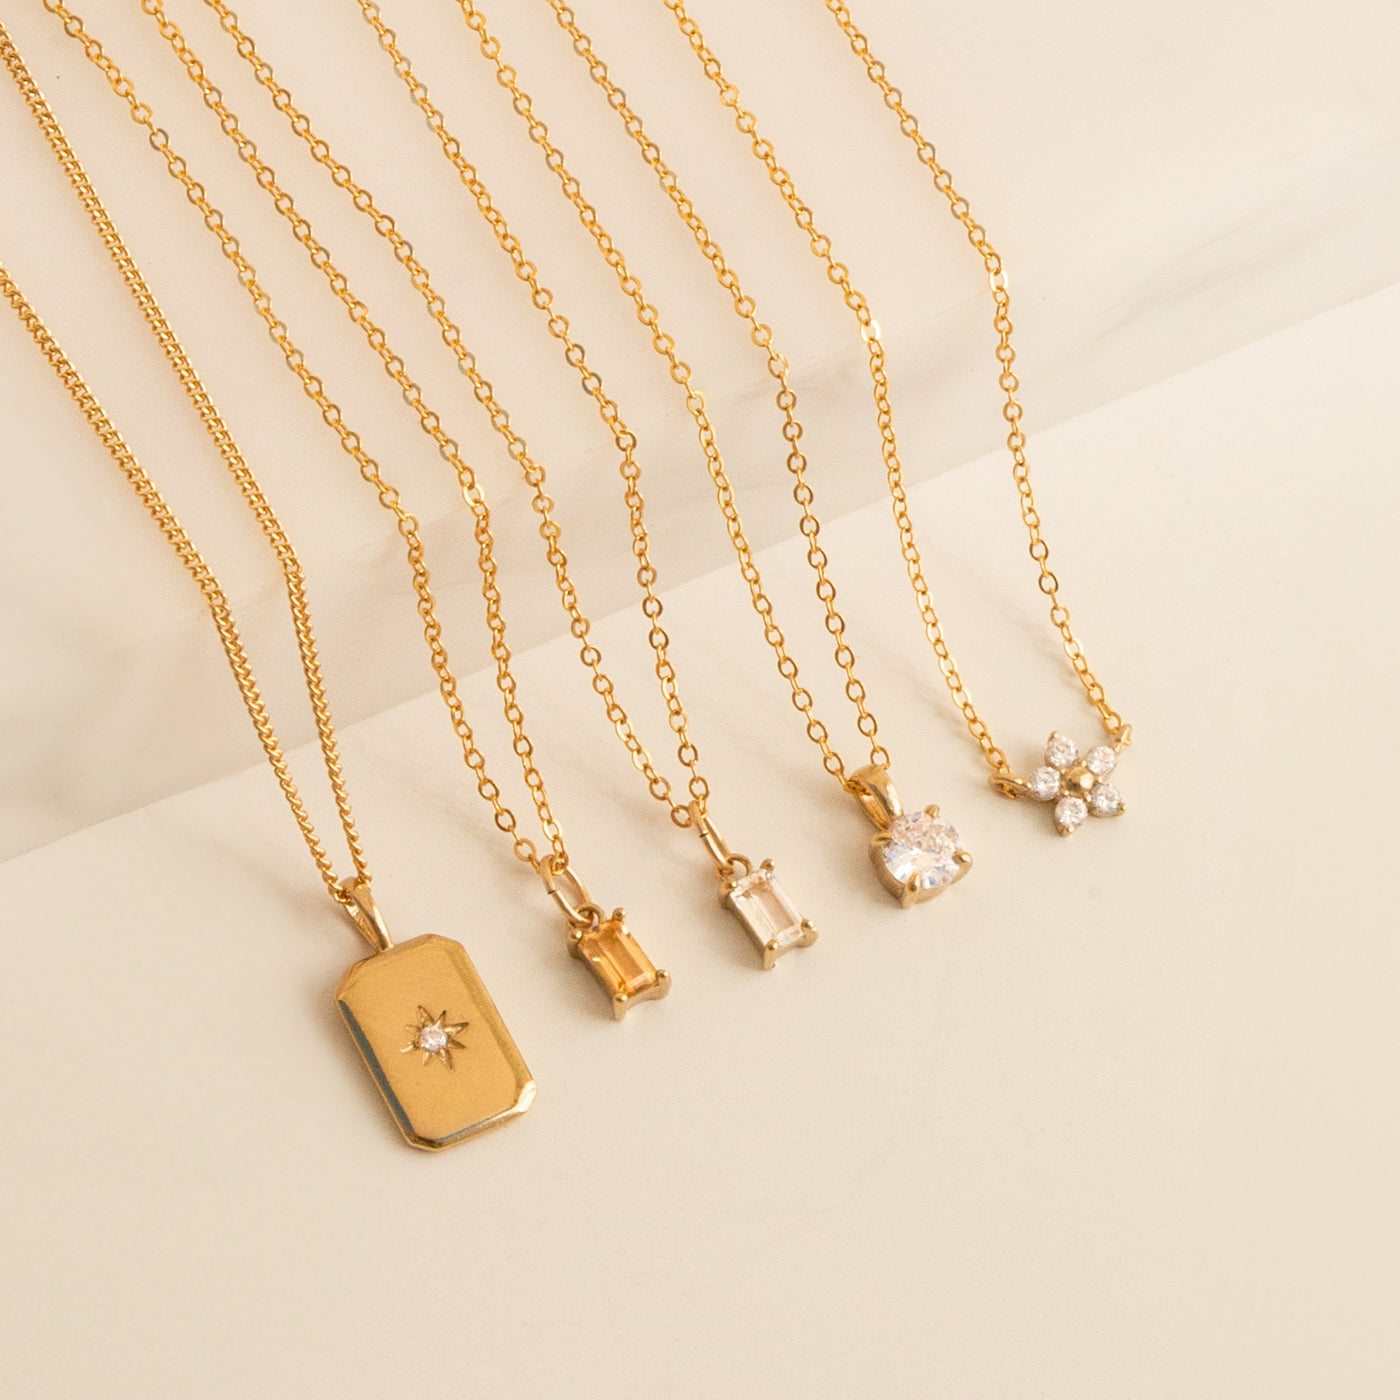 Hanging Solitaire Necklace | Simple & Dainty Jewelry